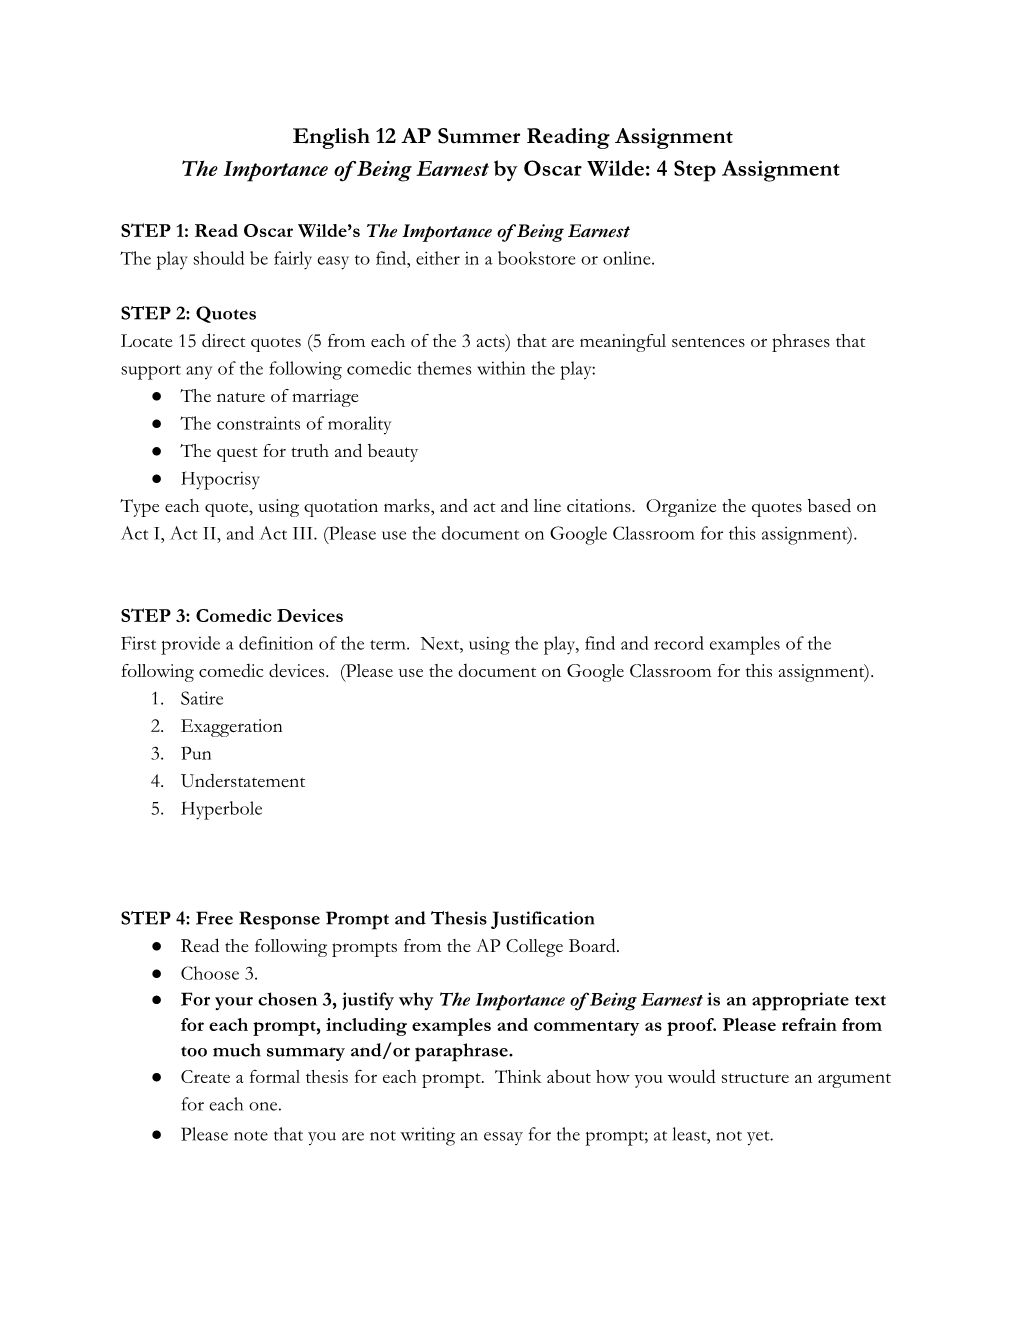 English 12 AP Summer Reading Assignment the Importance of Being Earnest by Oscar Wilde: 4 Step Assignment ​